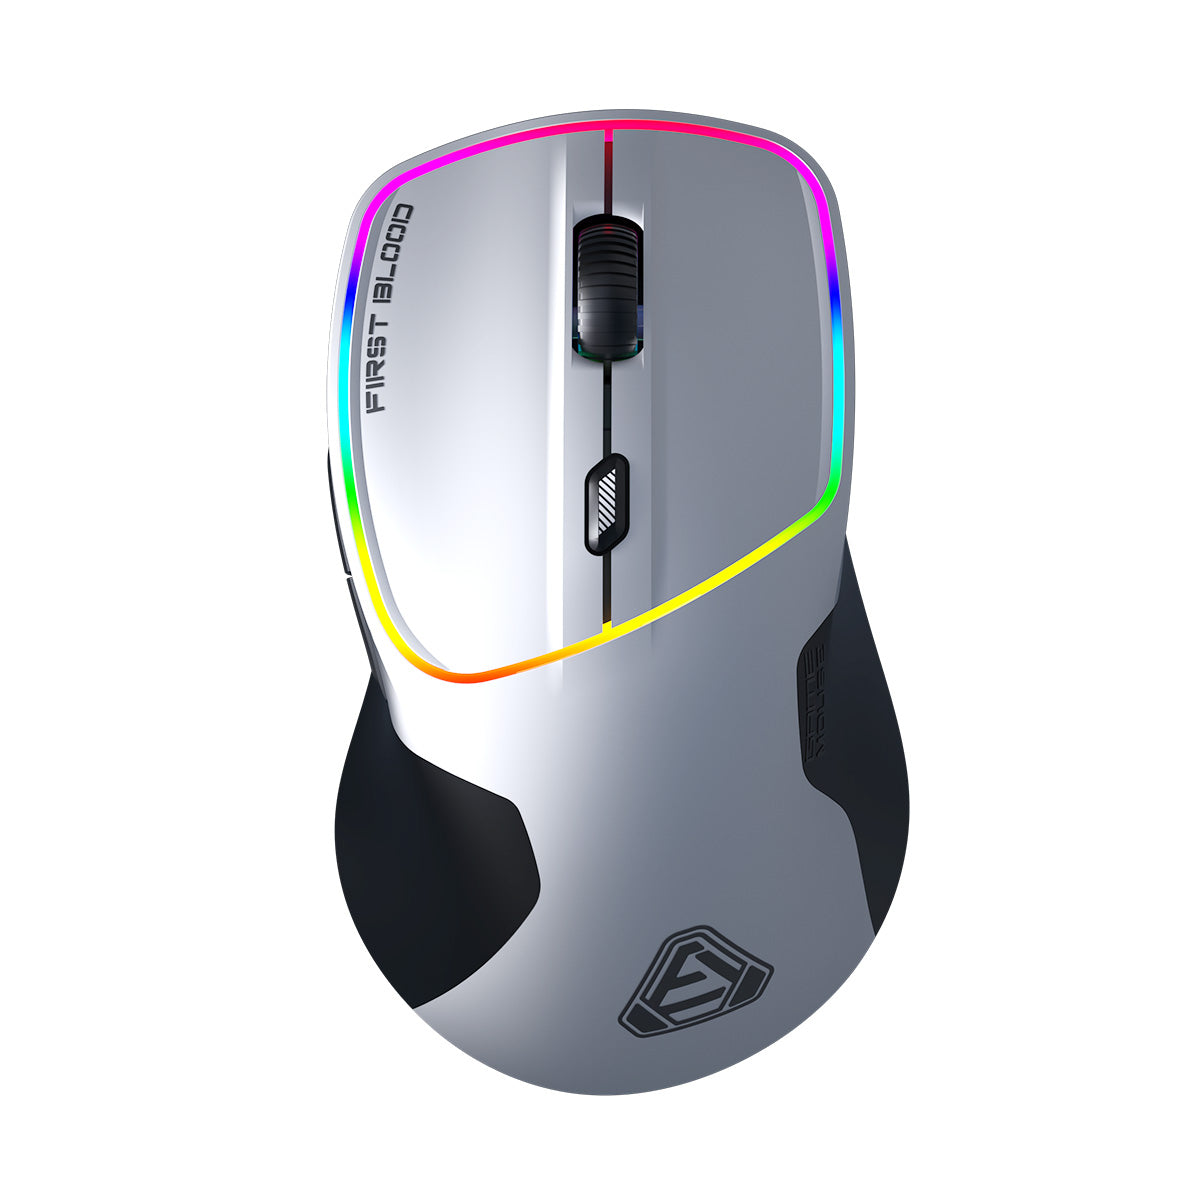  FIRSTBLOOD ONLY GAME. AJ380 69g Lightweight Gaming Mouse with  Honeycomb Shell, RGB Backlit, 16000 DPI PixArt 3338 Sensor, Programmable 6  Buttons, Black : Video Games